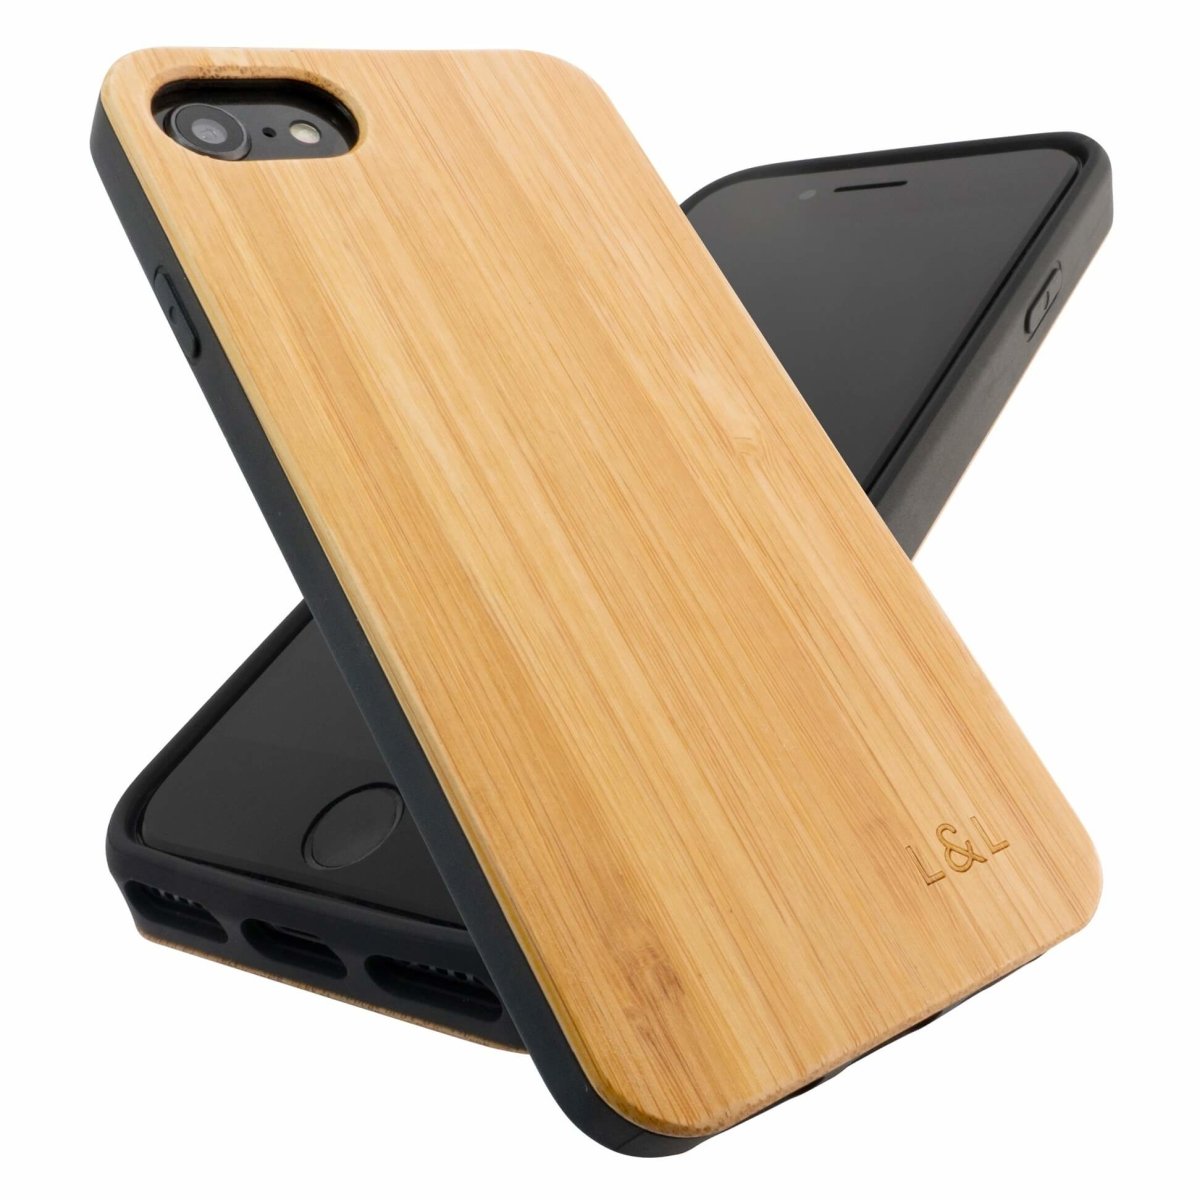 Bamboo iPhone 6/7/8/SE 2020 Wood Phone Case with Eco-Friendly Shell Eco Friendly Products, iPhone, iPhone 6, iPhone 6s, iPhone 7, iPhone 8, iPhone Cases, iPhone SE, iPhone SE 2020, New, Phone Cases Loam & Lore